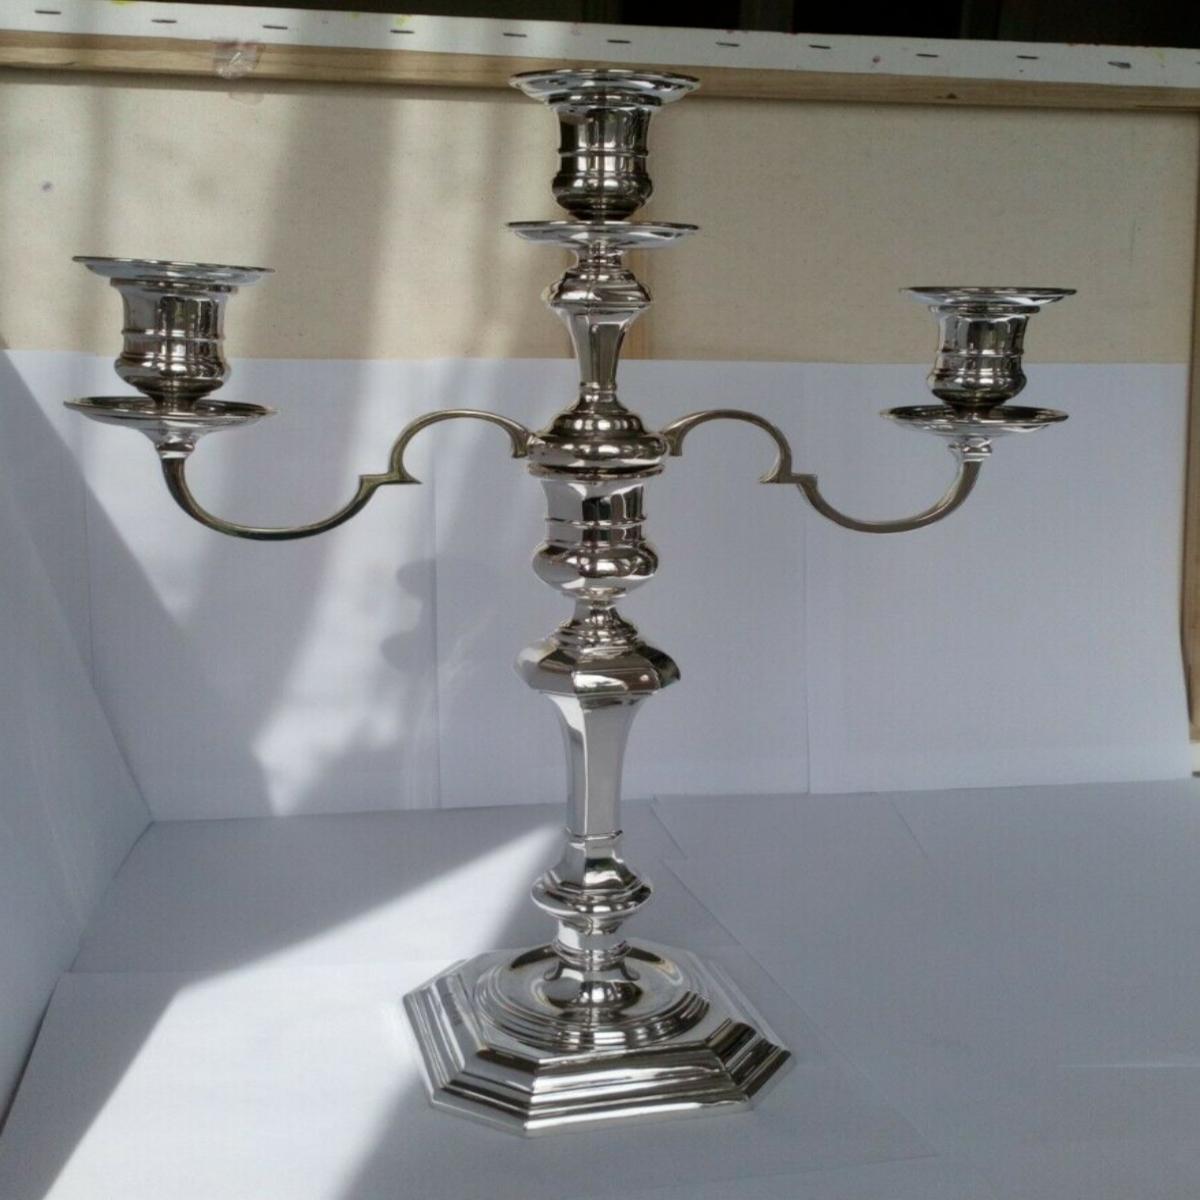 Sterling Silver Candleabra Made by Elkington & Co Ltd from 1967

In good condition, this is a lovely piece. The top part is removable so it can be used as a single candlestick or a candelabra. Hallmarked: Made by Elkington & Co Ltd in Newhall